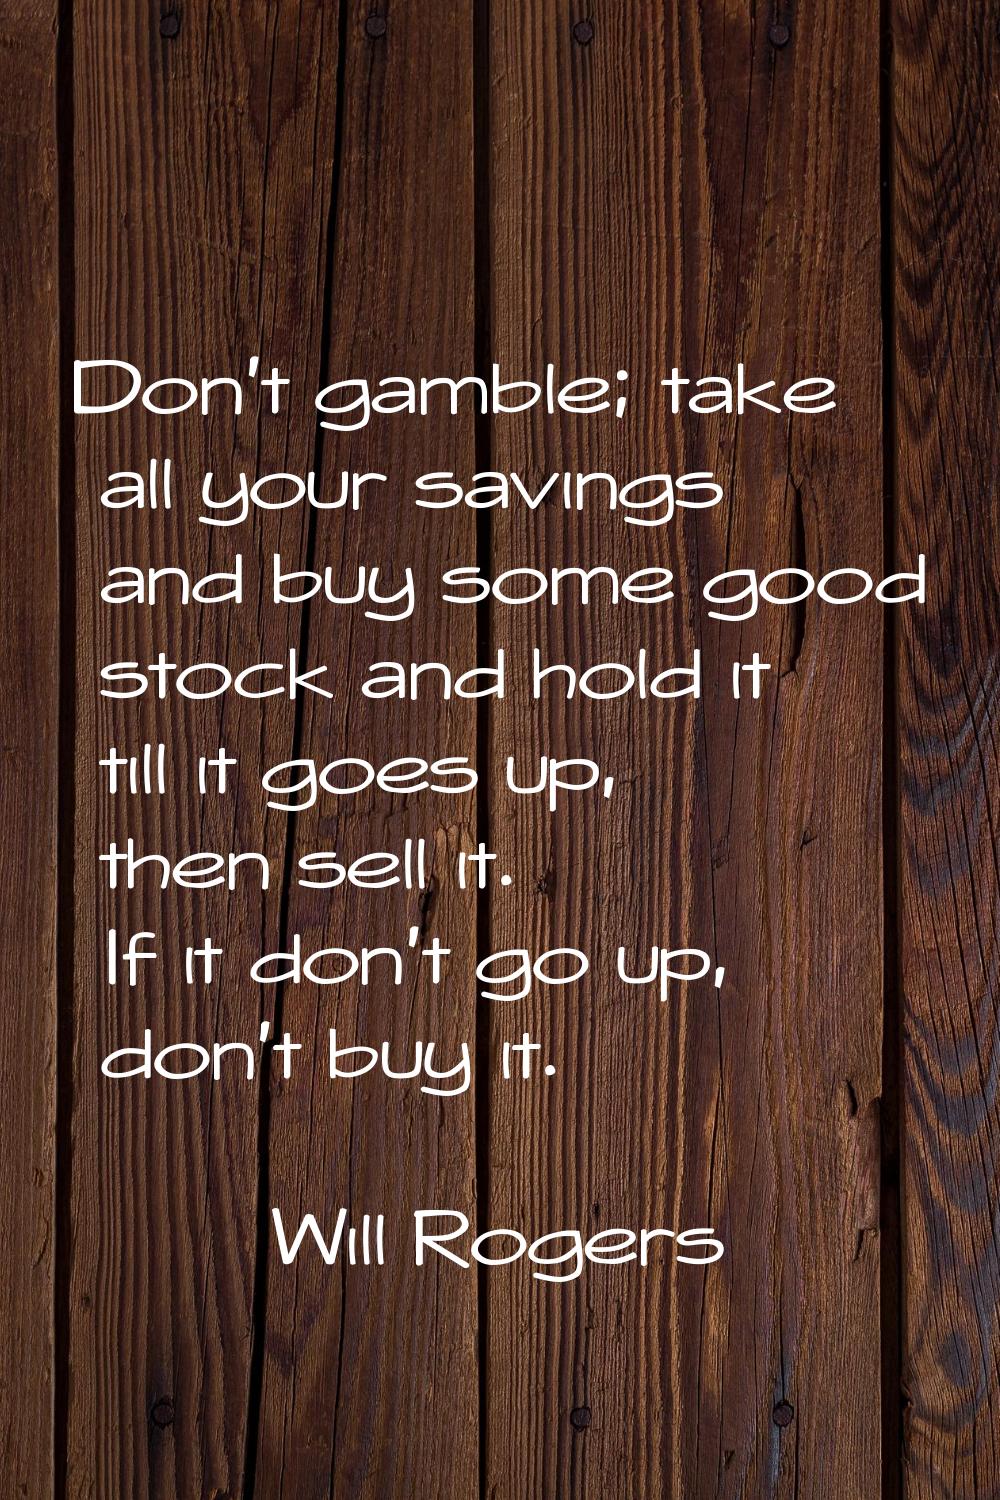 Don't gamble; take all your savings and buy some good stock and hold it till it goes up, then sell 